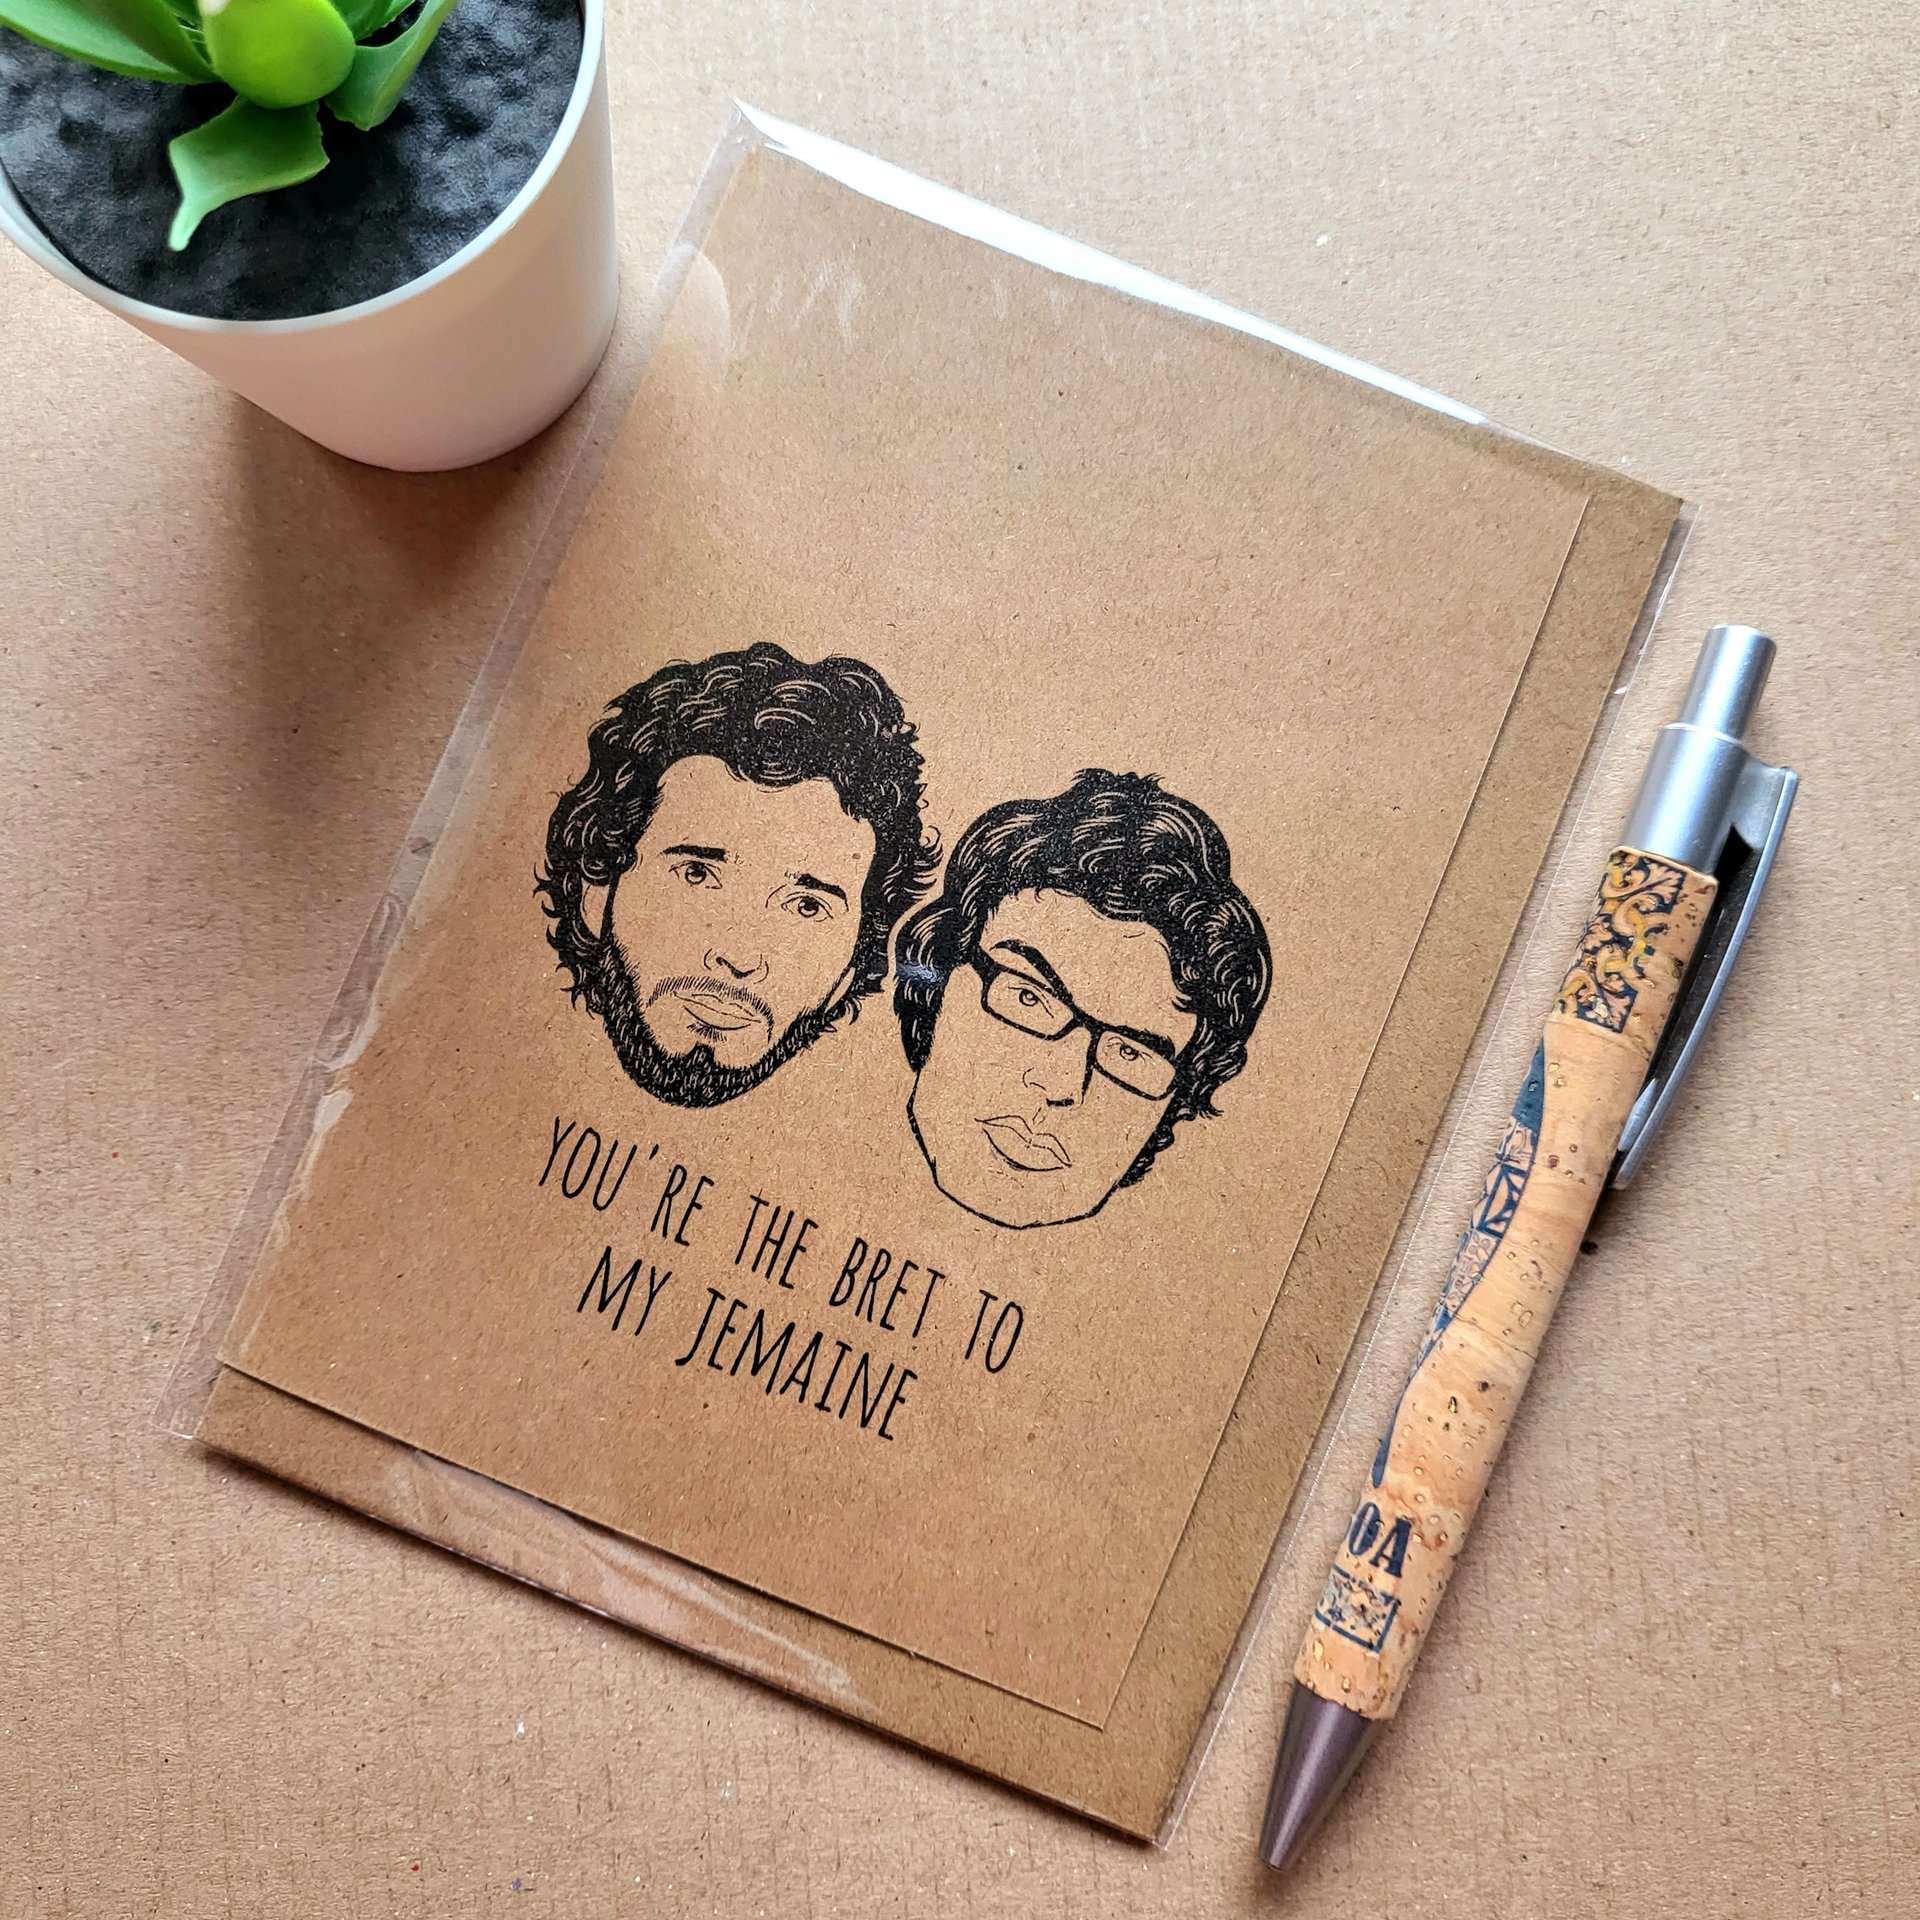 Funny Flight of the Conchords Birthday Card - Bret to my Jemaine